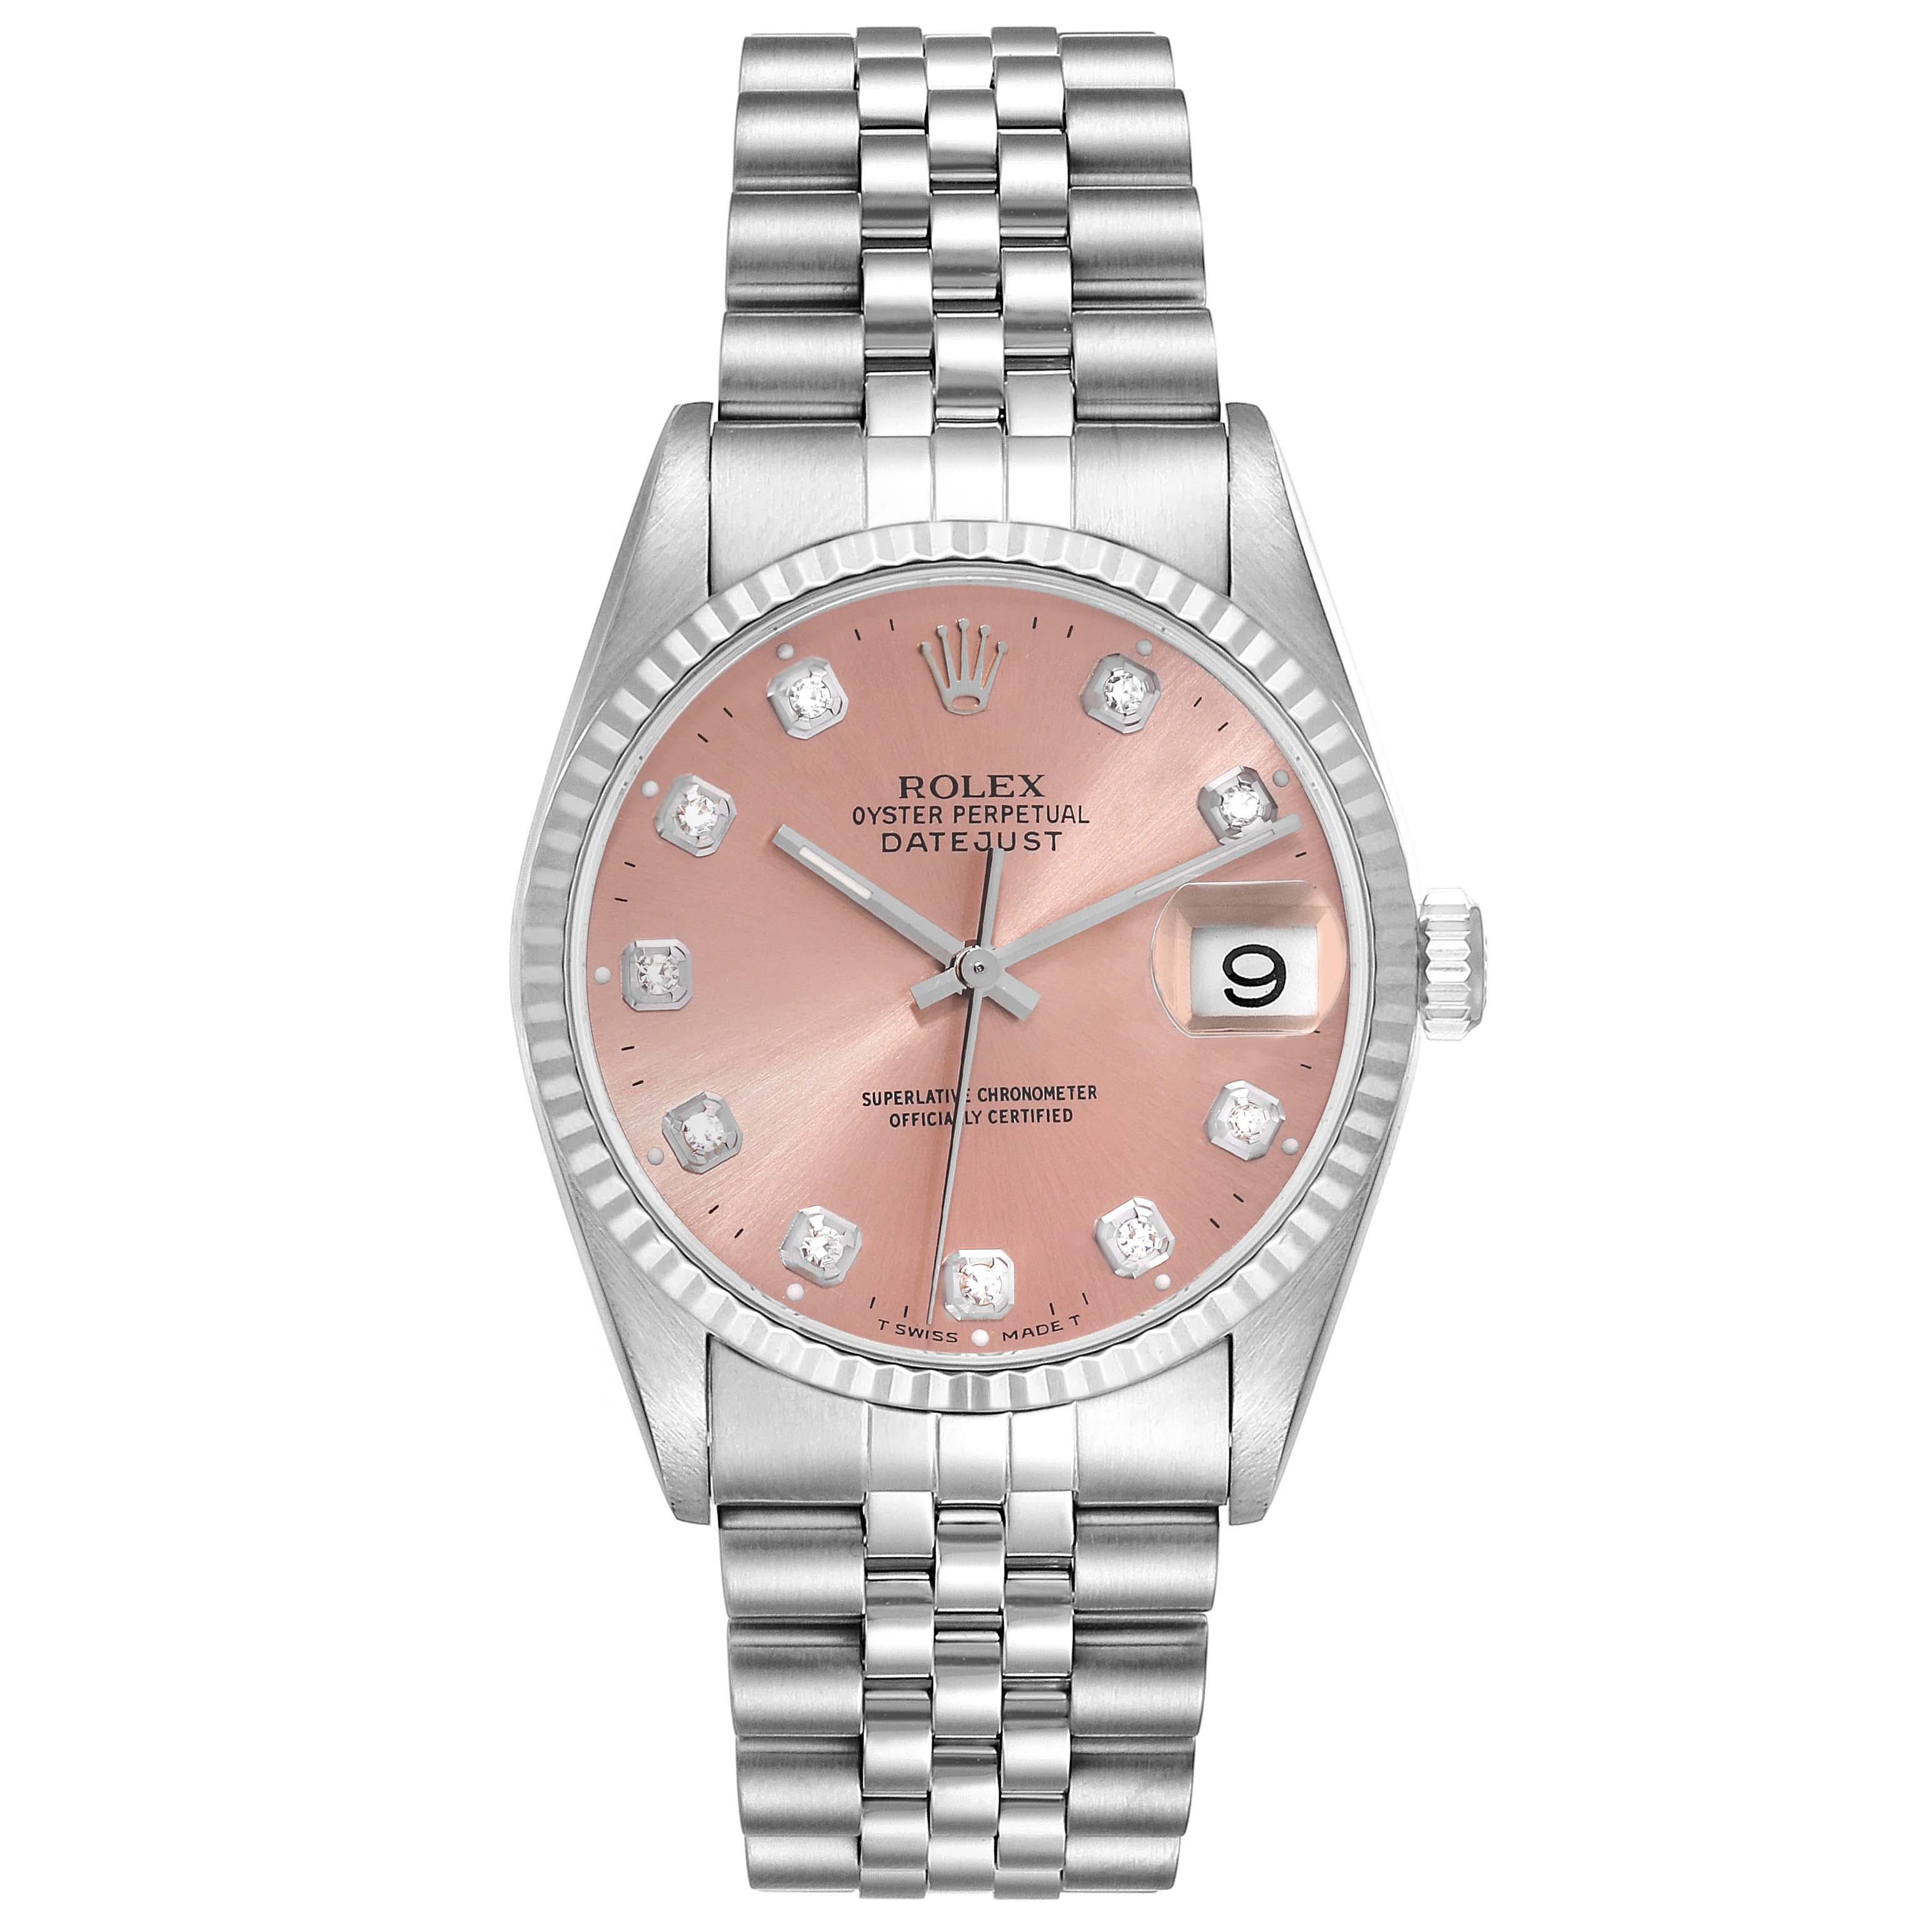 Rolex Datejust Steel White Gold Salmon Diamond Dial Mens Watch 16234. Officially certified chronometer automatic self-winding movement. Stainless steel case 36.0 mm in diameter. Rolex logo on the crown. 18k white gold fluted bezel. Scratch resistant